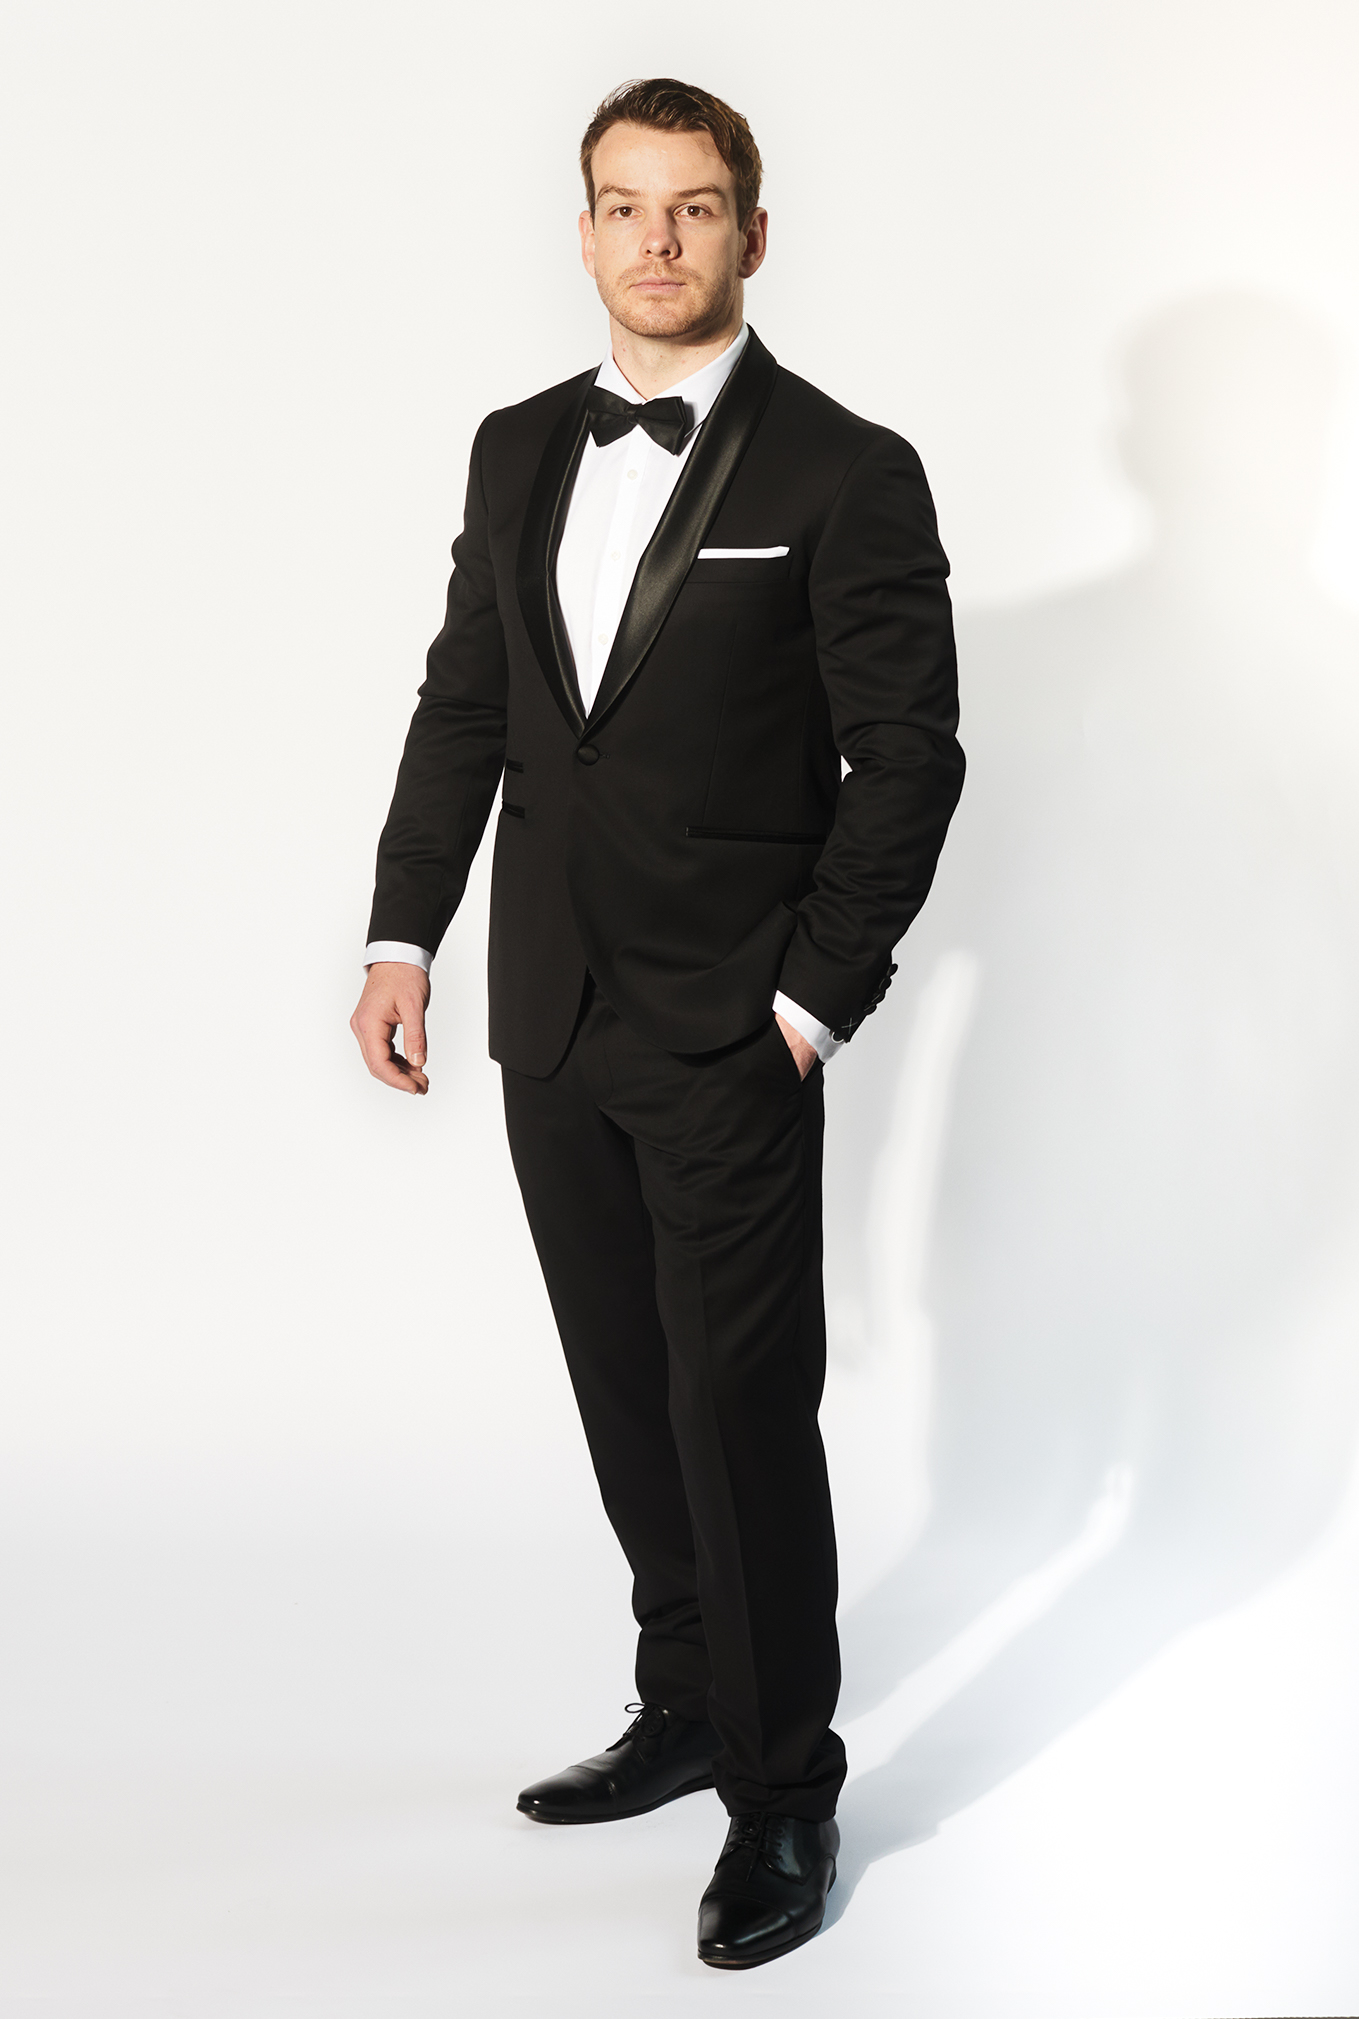 black suit and trousers for hire from brittons formal wear